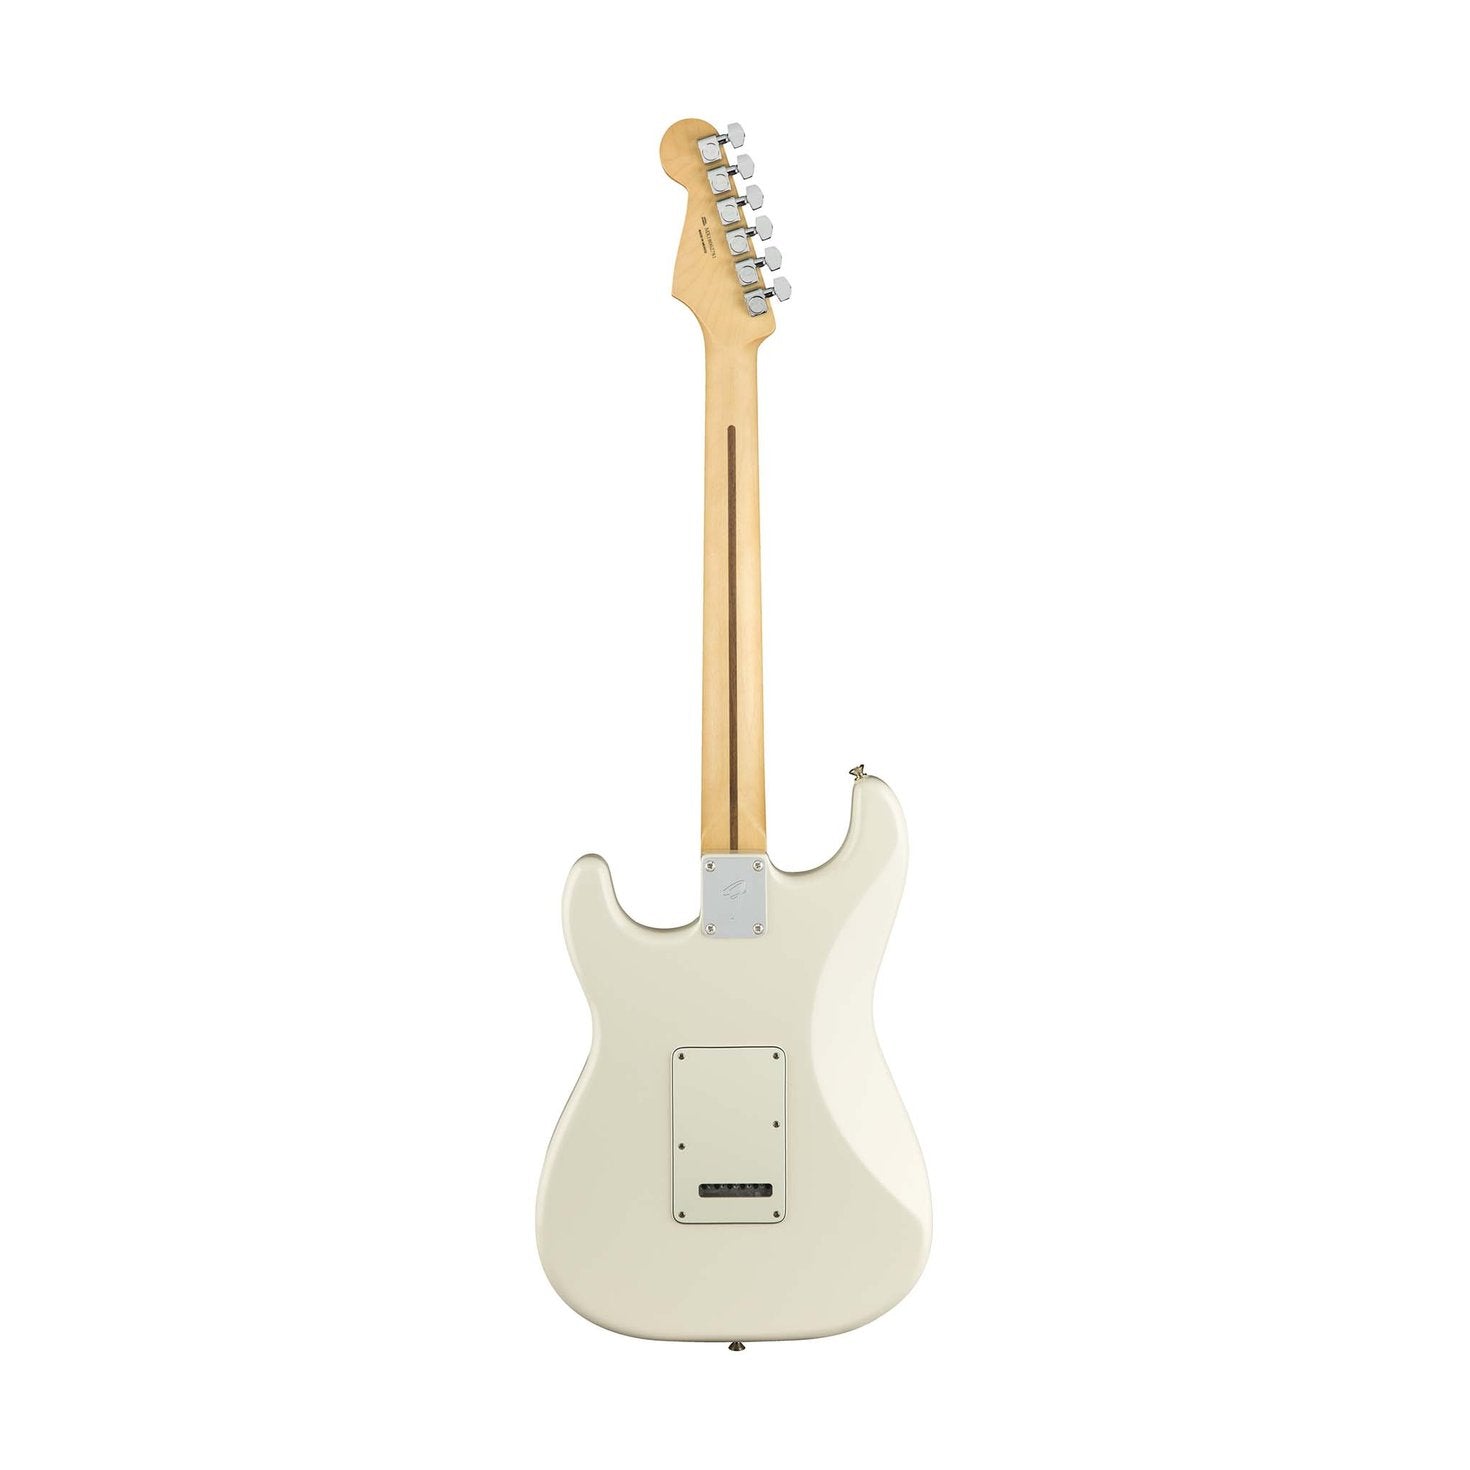 Fender Player Stratocaster Electric Guitar, Maple FB, Polar White, FENDER, ELECTRIC GUITAR, fender-eletric-guitar-f03-014-4502-515, ZOSO MUSIC SDN BHD